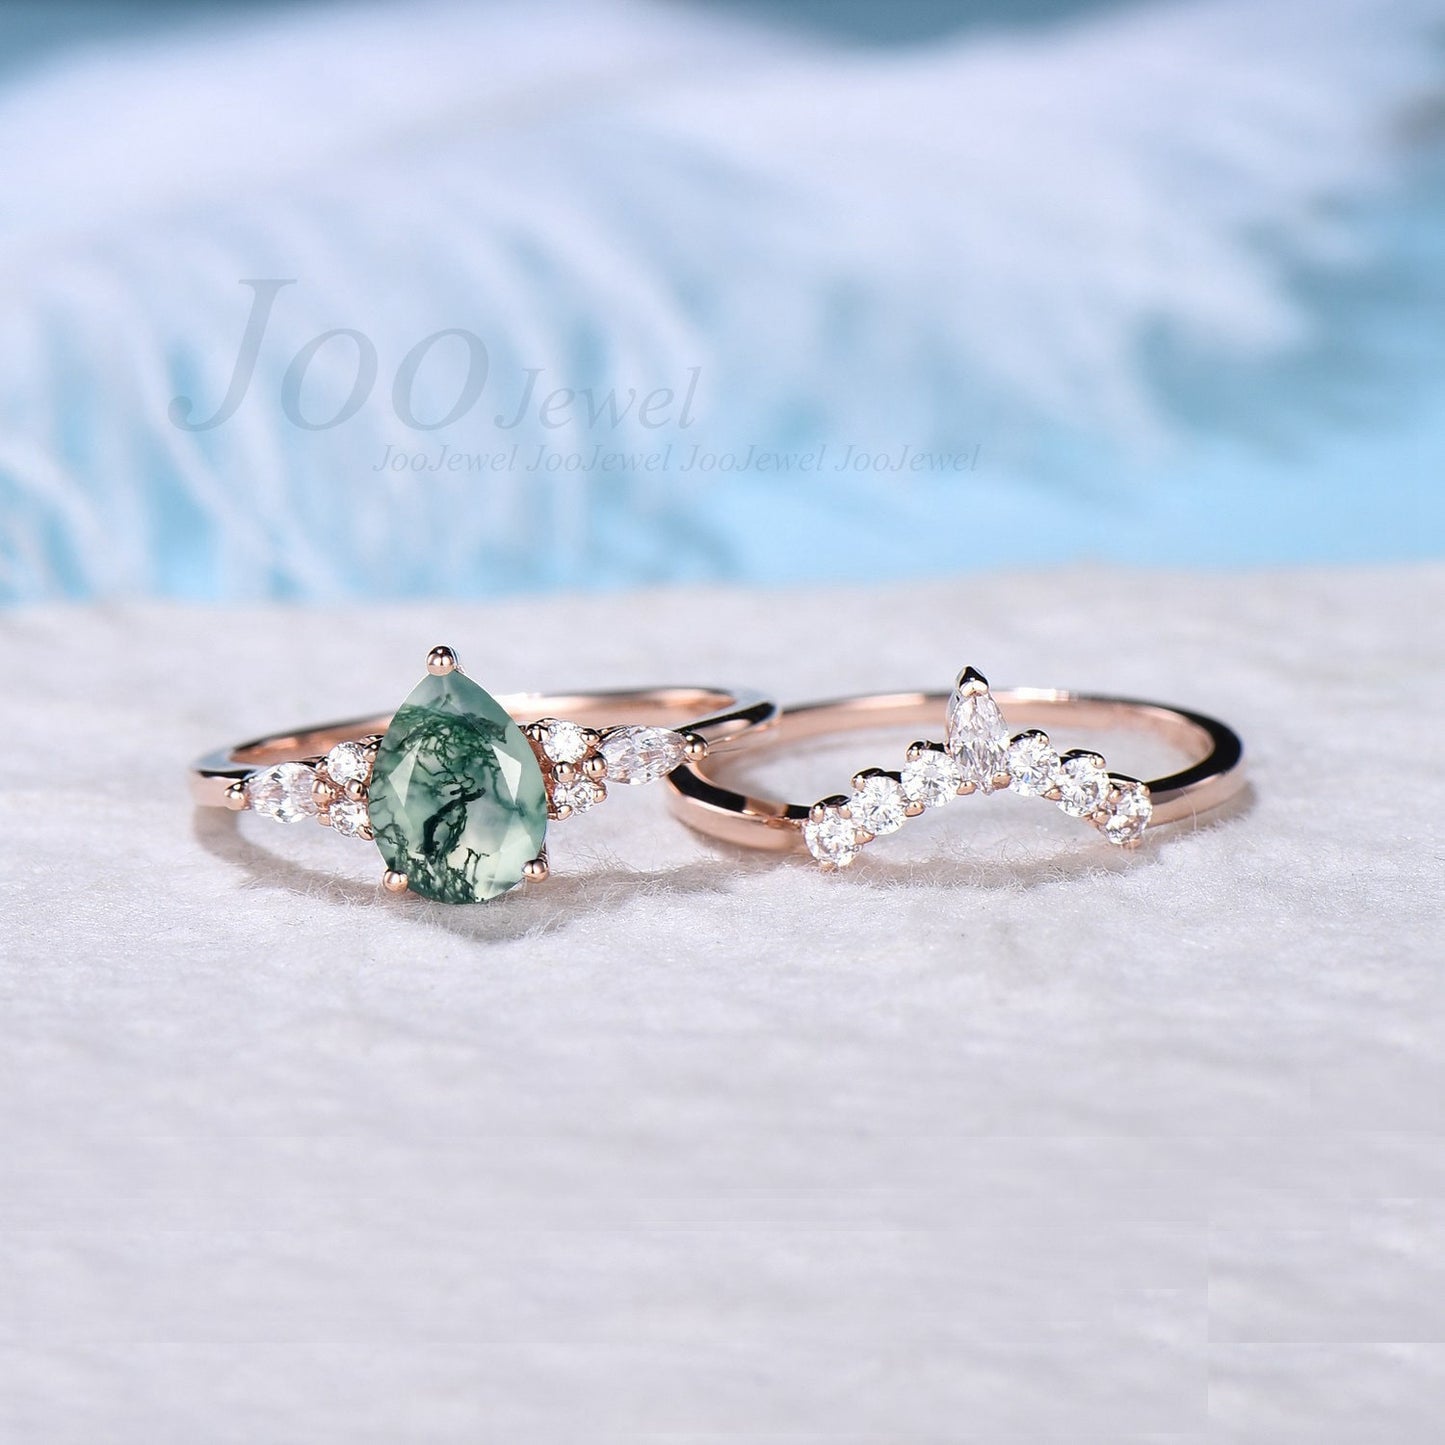 Unique Pear Shaped Engagement Ring Sterling Silver Natural Green Moss Agate Ring For Women Vintage Moss Agate Crystal Engagement Ring Set